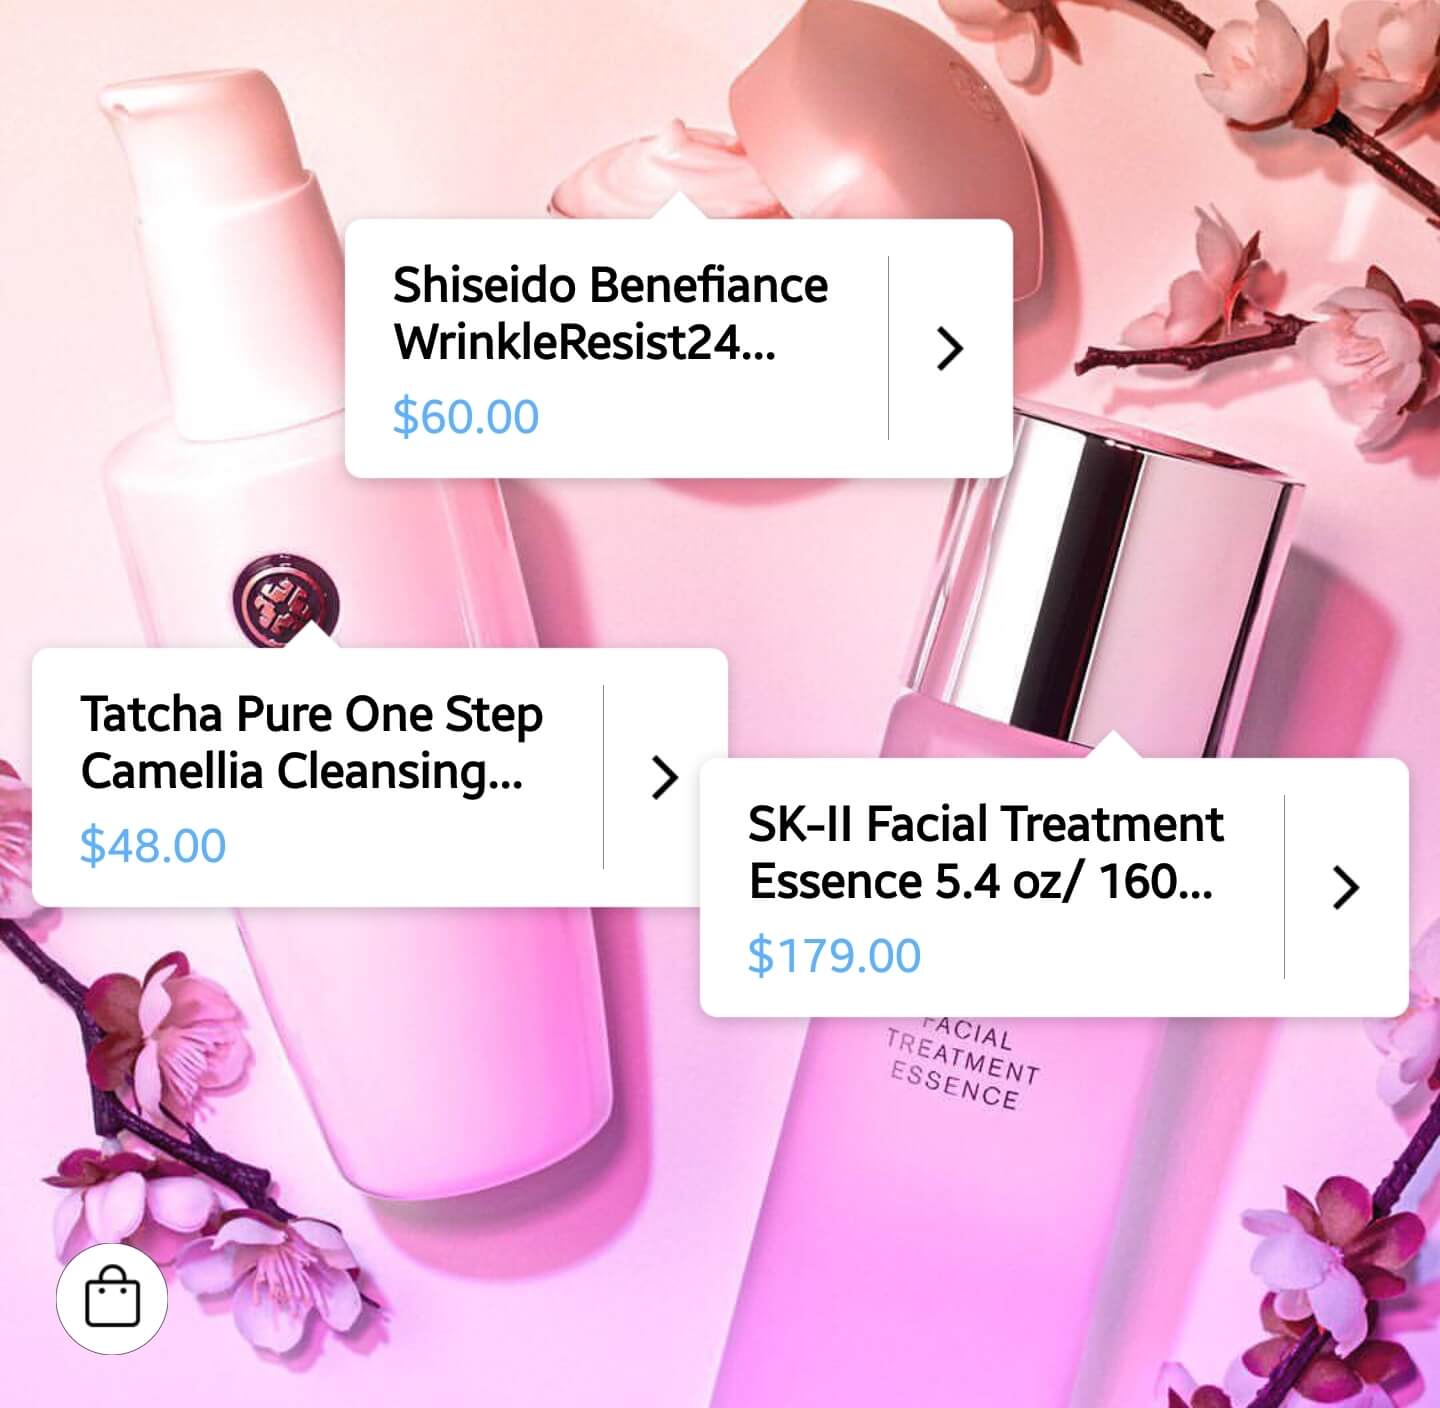 An Instagram post from Sephora, showing three product tags.